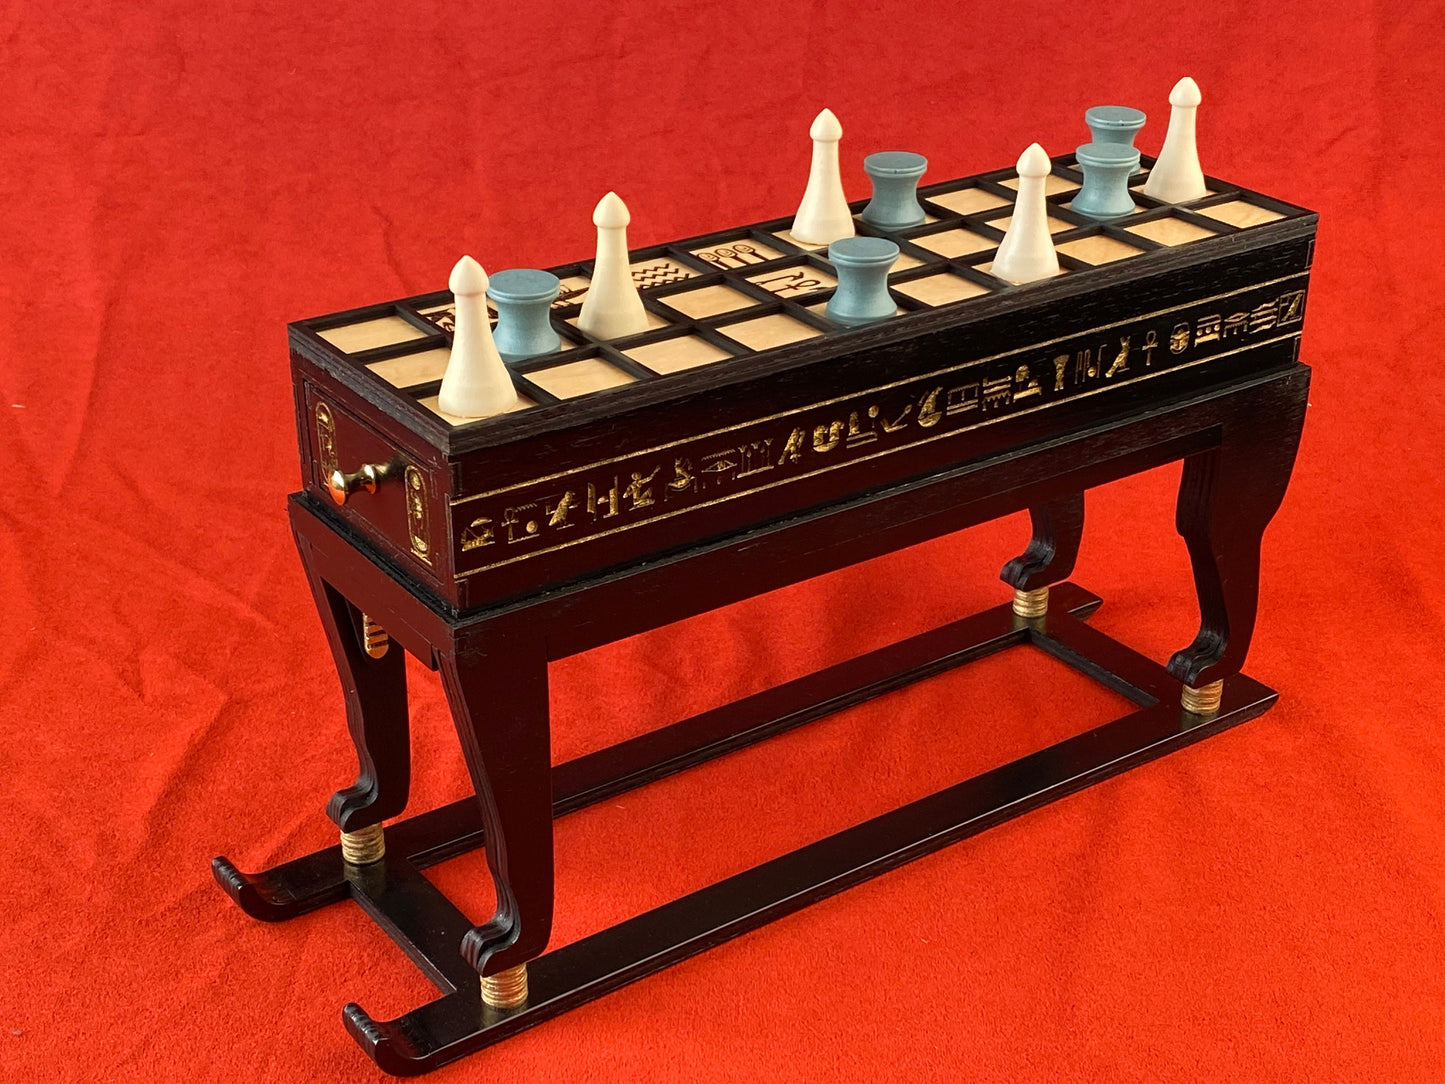 King Tutankhamun's SENET Game ~ Limited Edition. Straight from the Tomb of the Boy King!